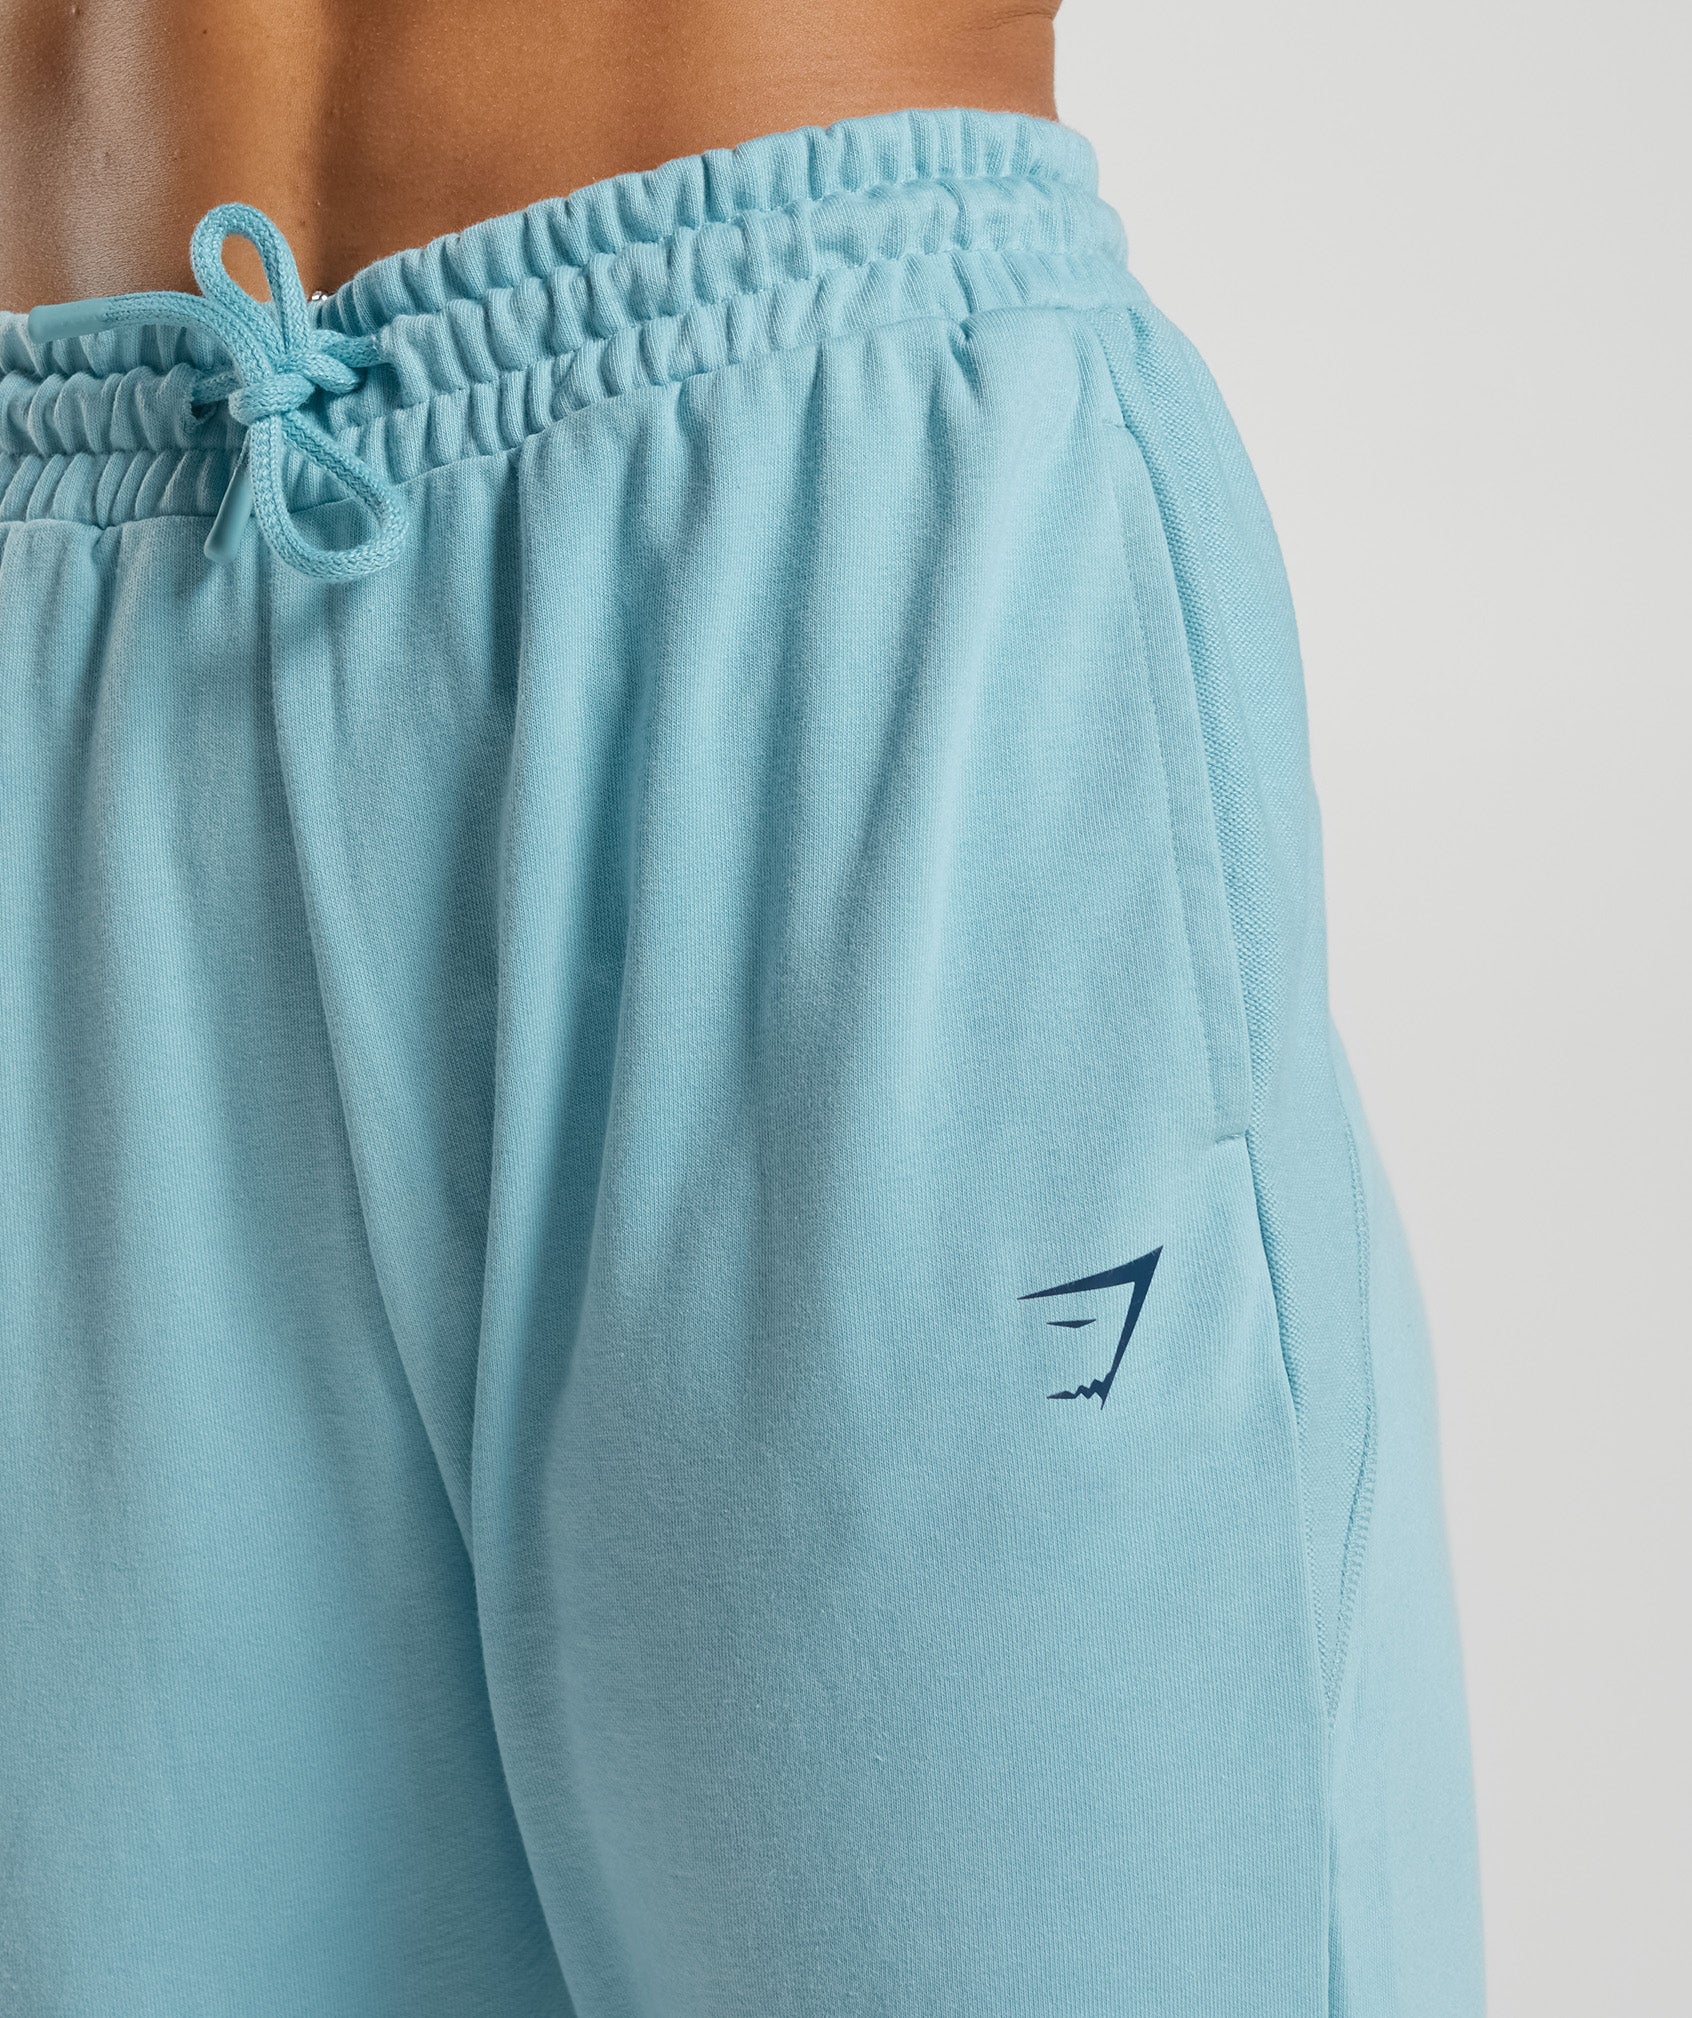 GS Power Joggers in Iceberg Blue